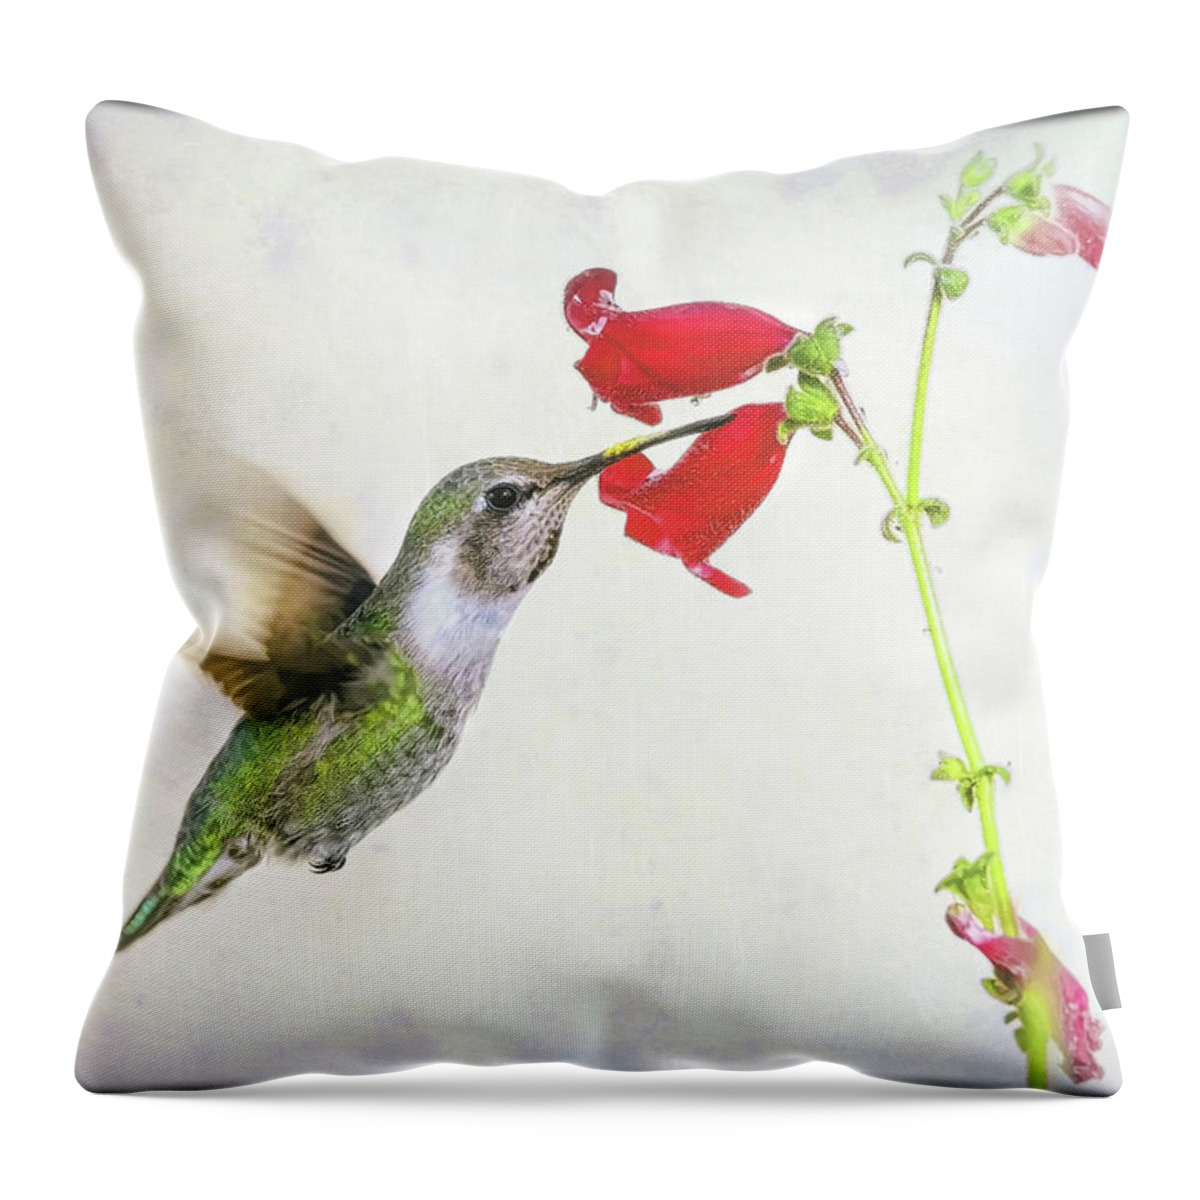 Hummingbirds Throw Pillow featuring the photograph A Moment In Time by Elaine Malott